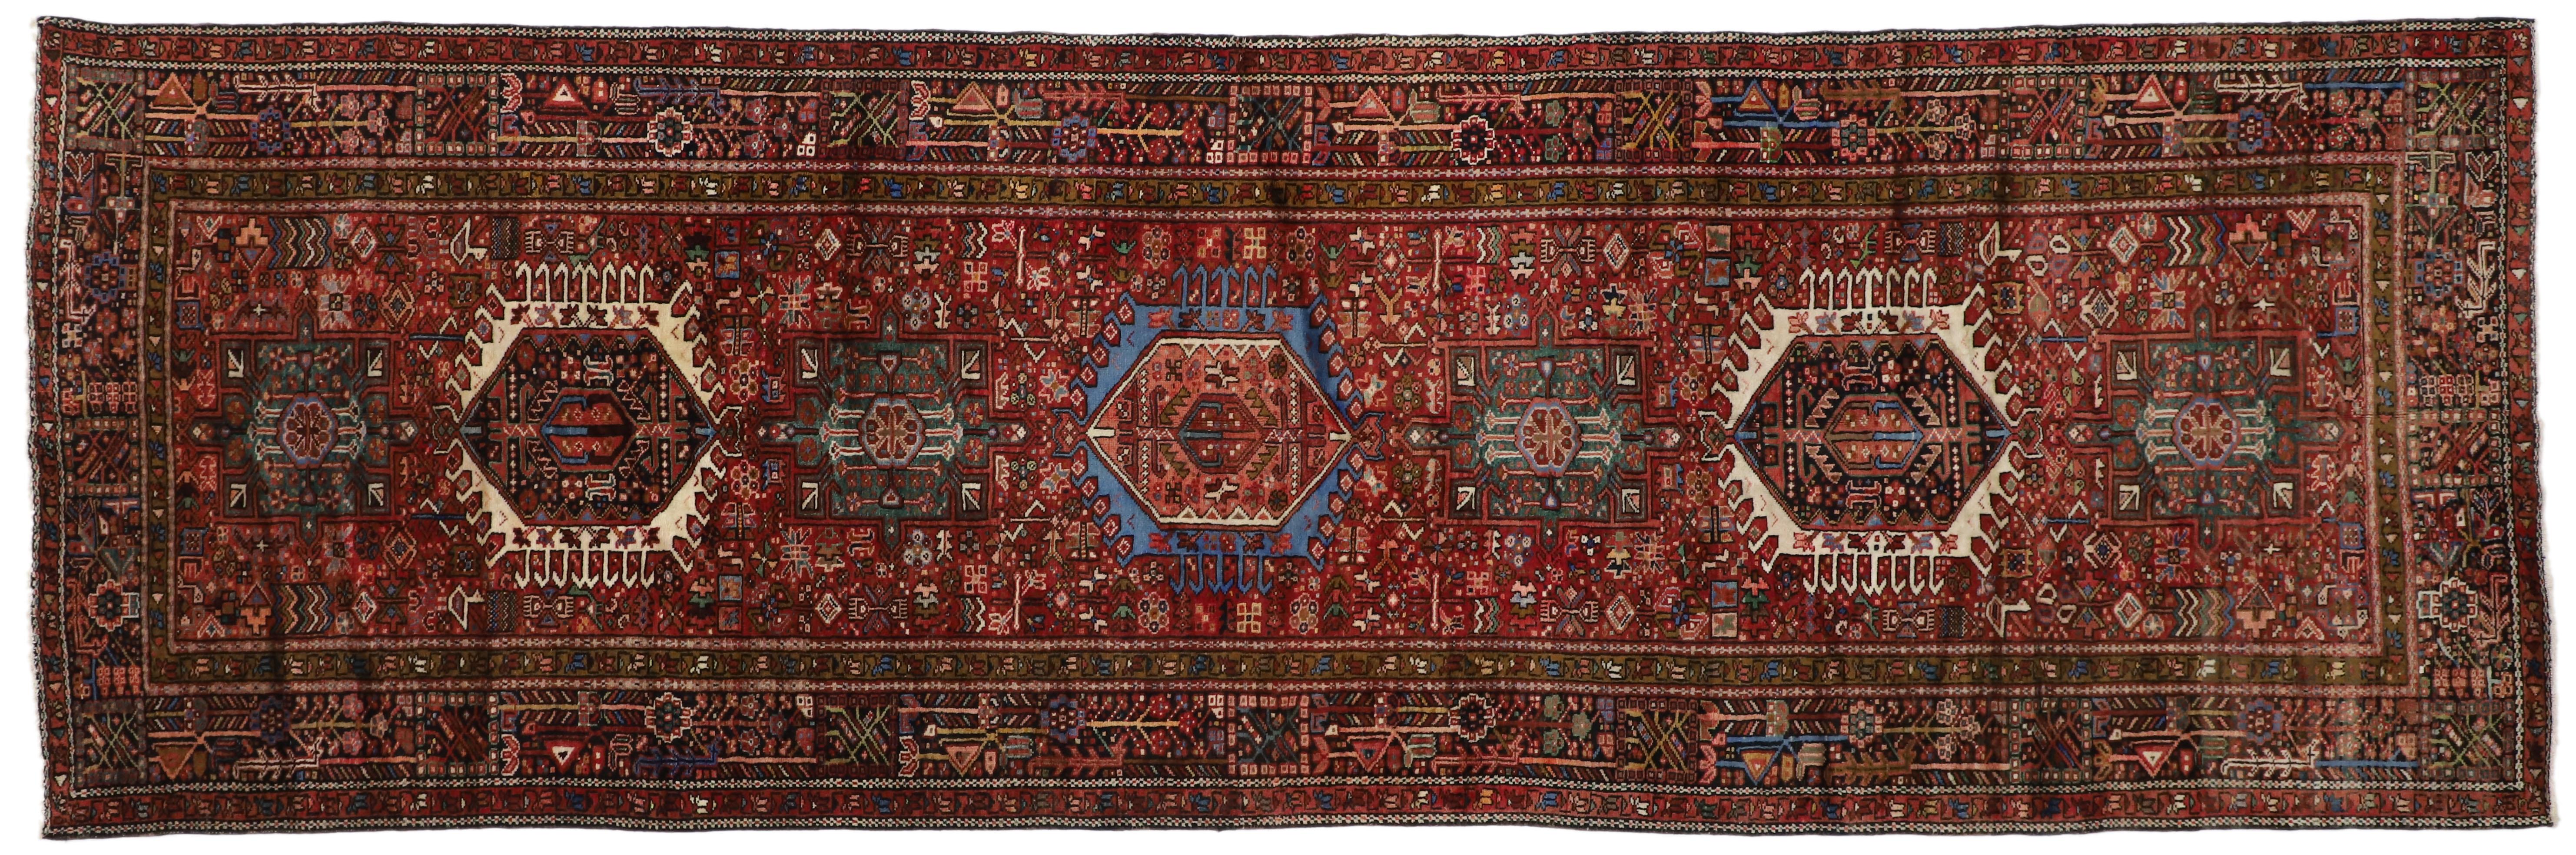 76004 Vintage Persian Karaja Heriz Gallery Rug, Wide Hallway Runner Tribal Style. With timeless appeal, refined colors, and architectural design elements, this hand knotted wool antique Persian Karaja Heriz gallery rug can beautifully blend